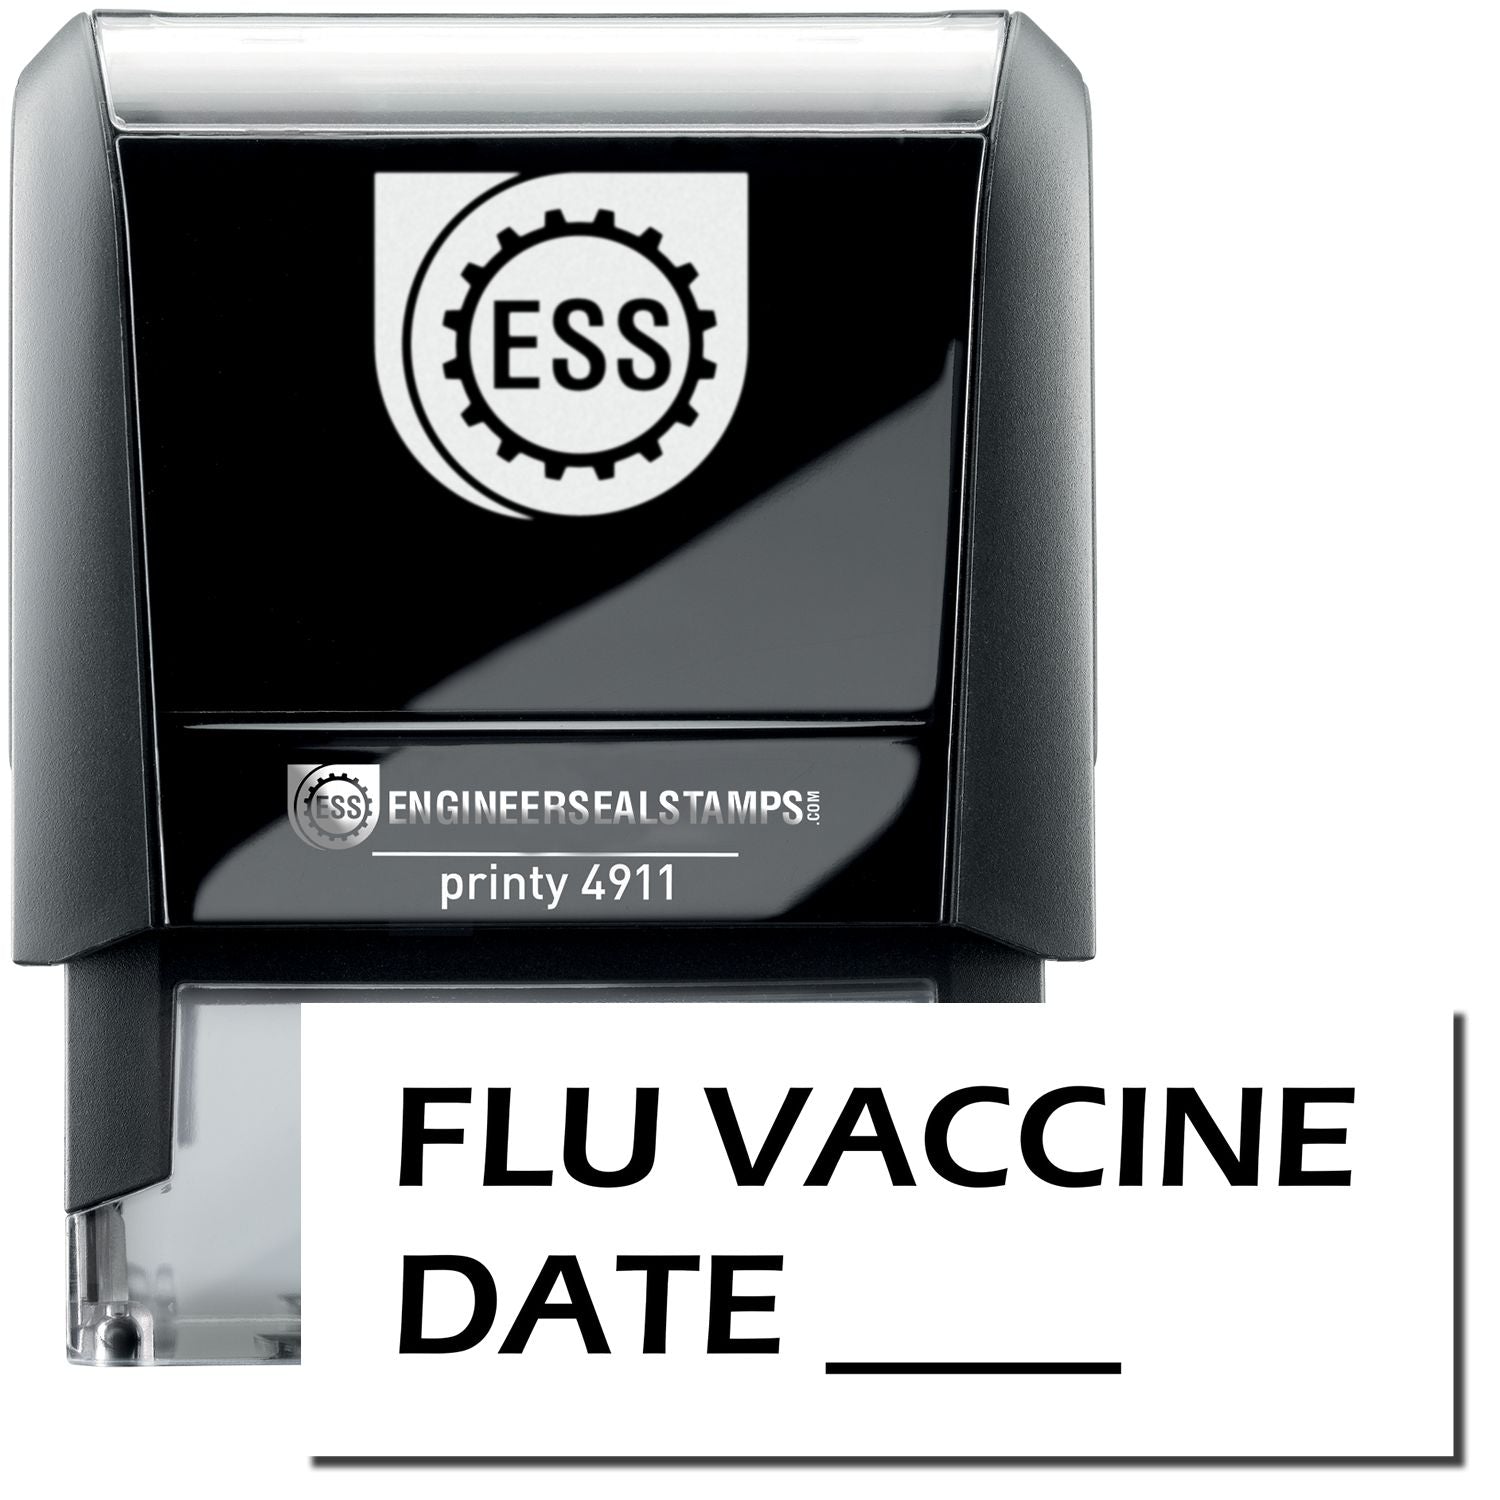 A self-inking stamp with a stamped image showing how the text "FLU VACCINE DATE" with a line is displayed after stamping.